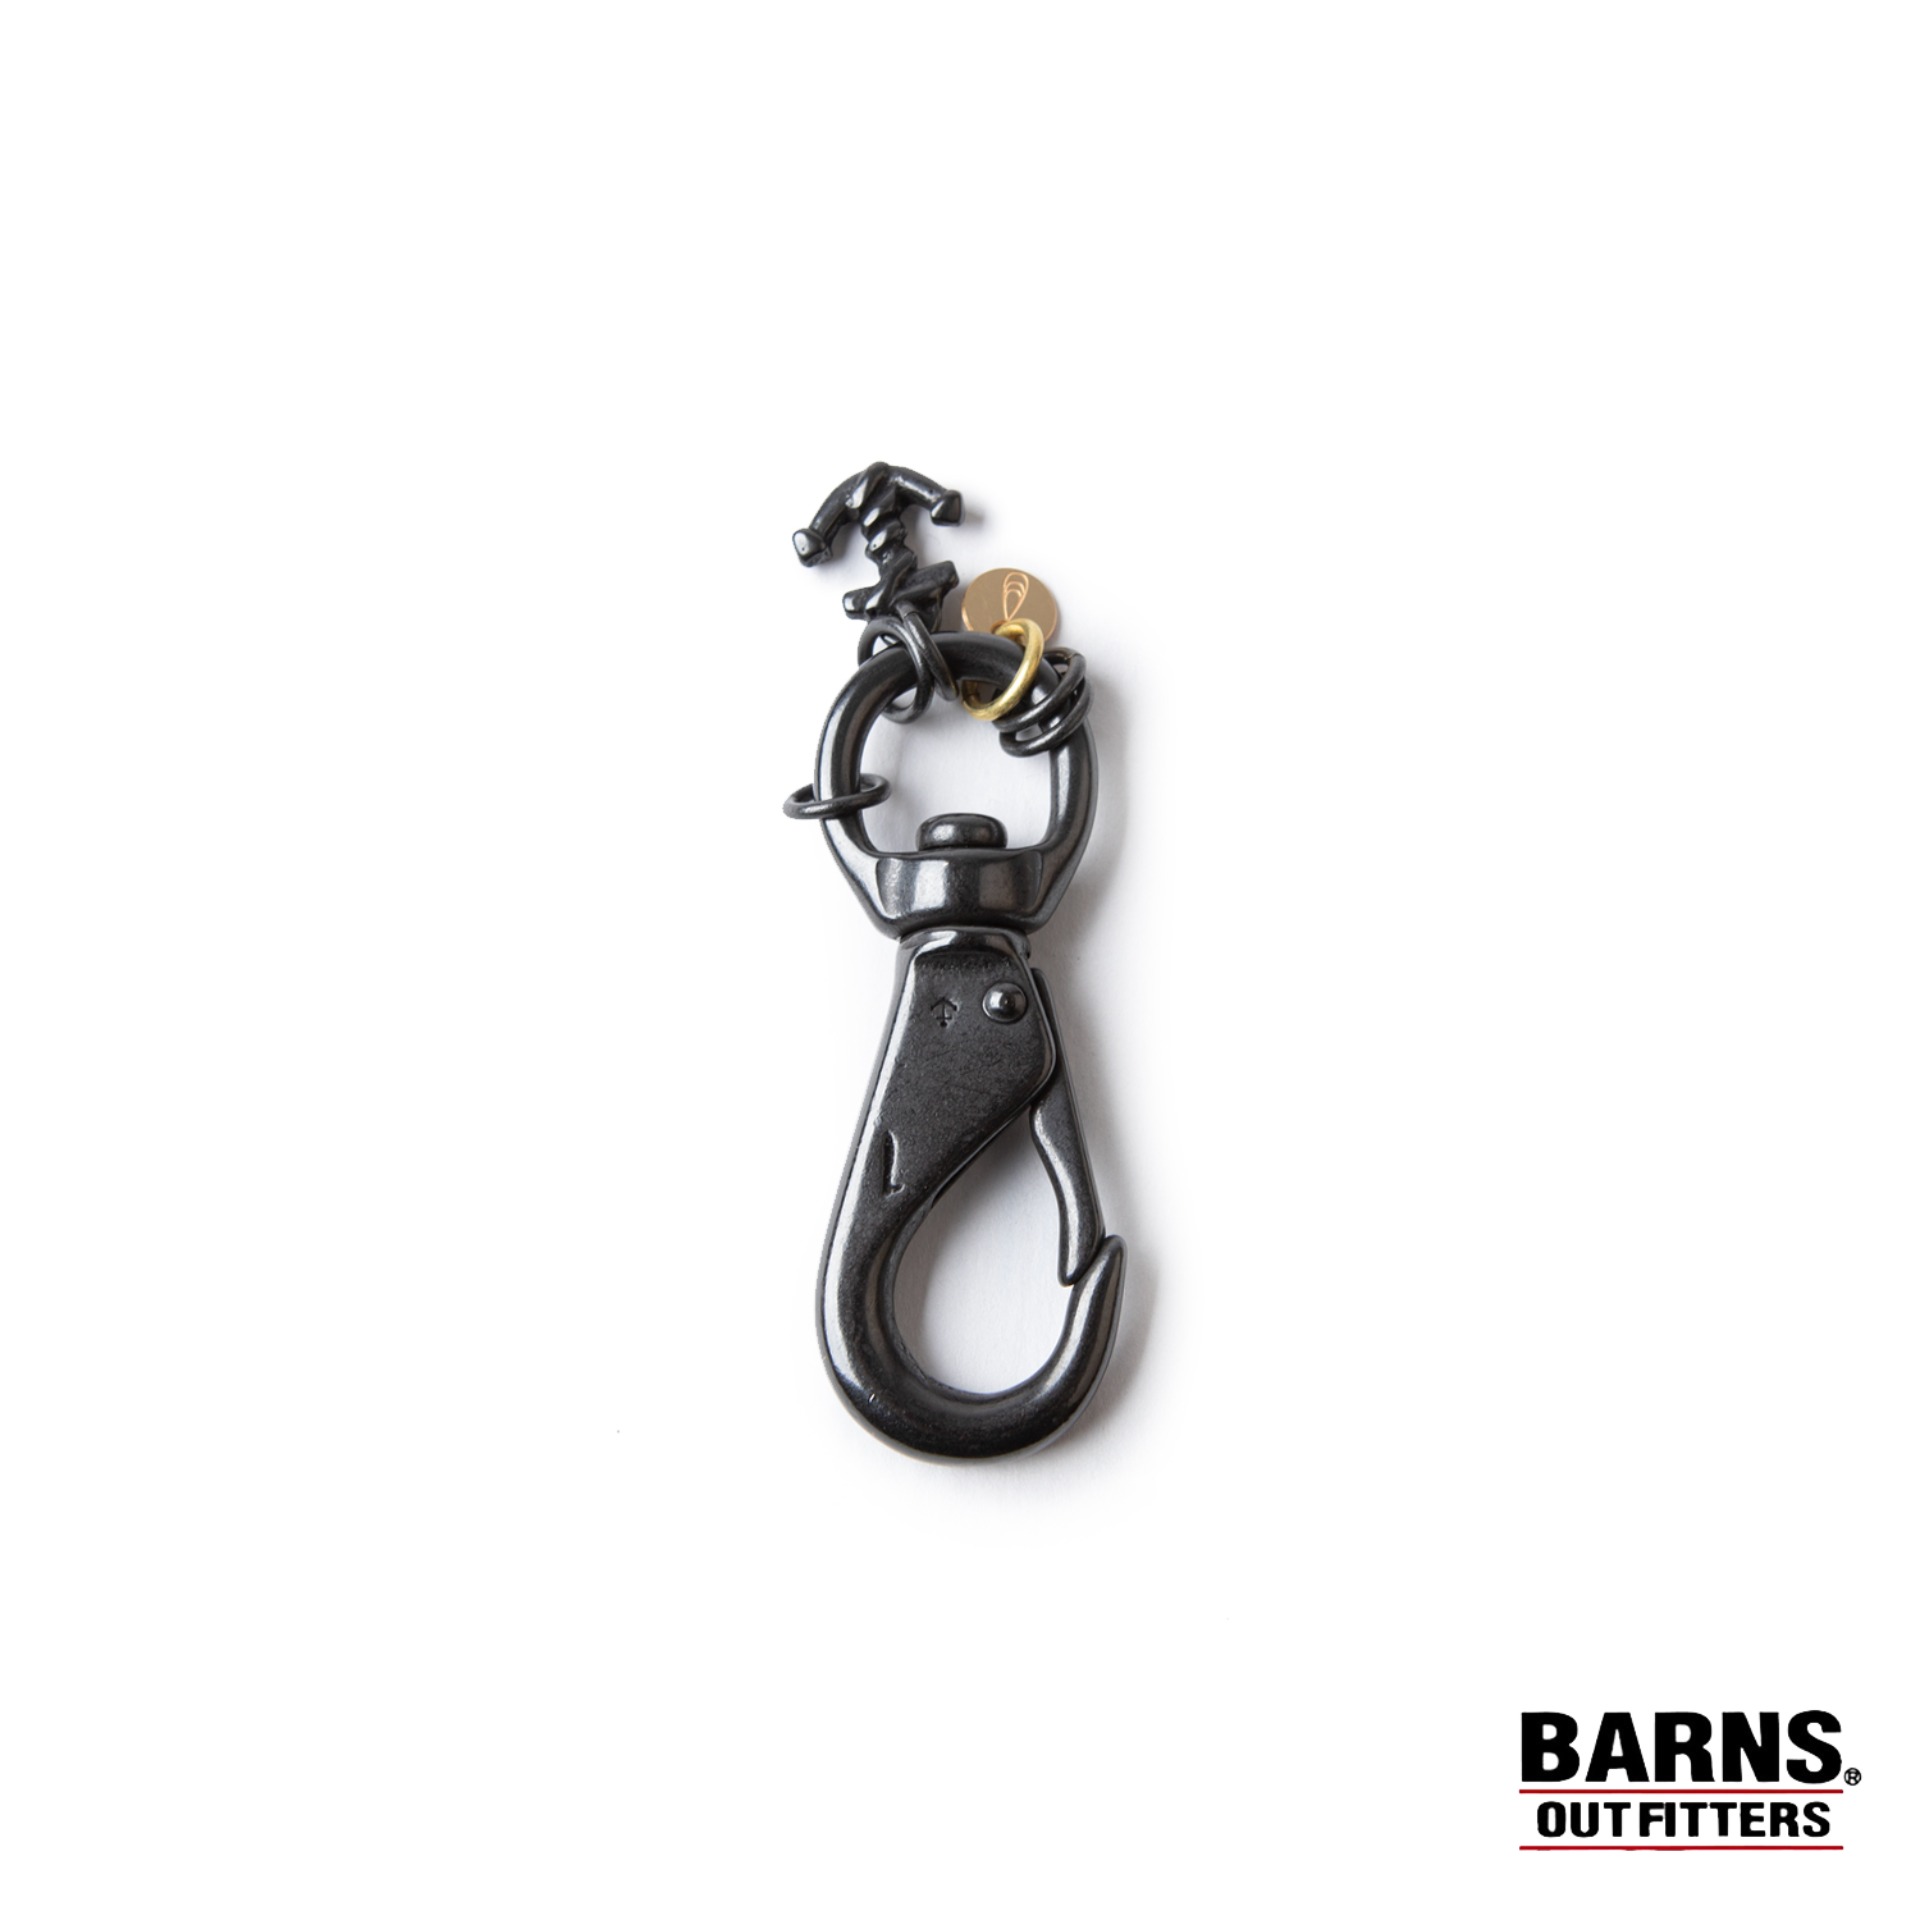 BUTTON WORKS BLACK LINE SWIVEL ANCHOR RING HOOK